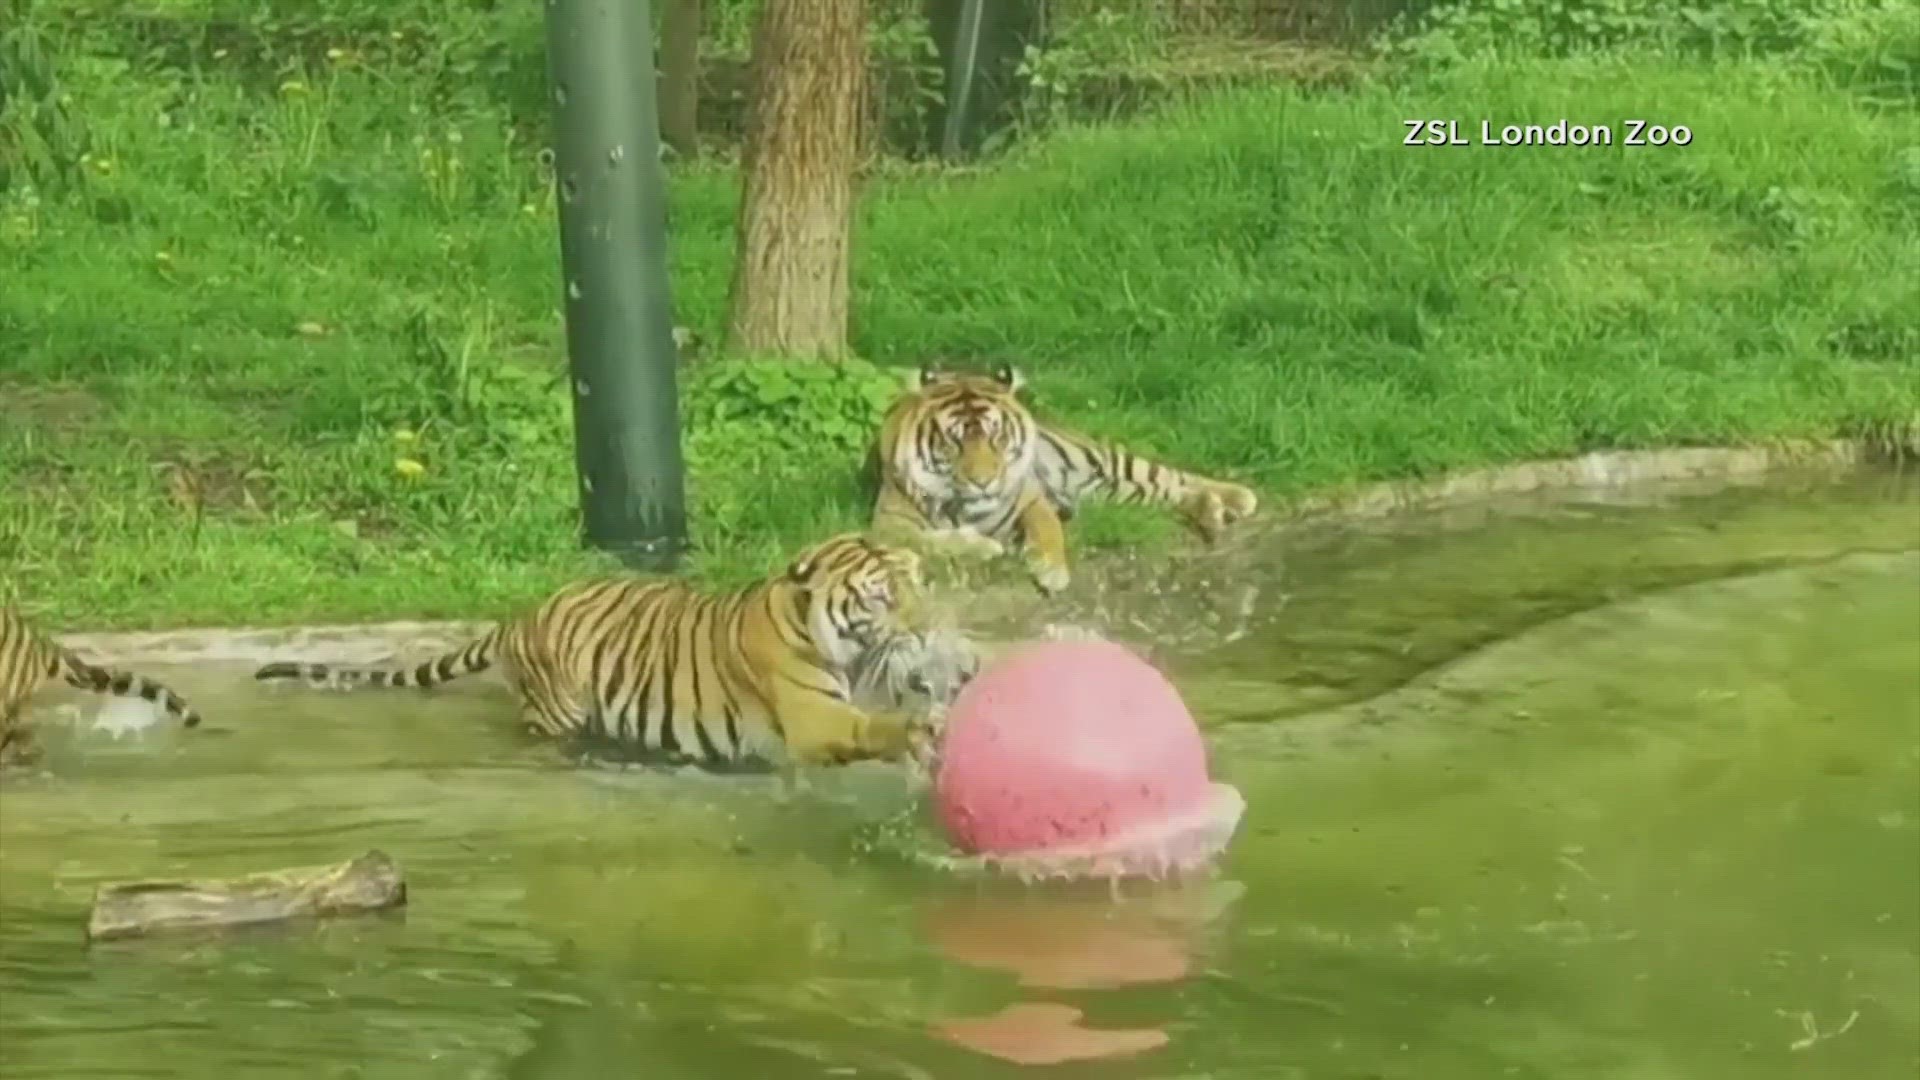 The big cats had fun frolicking in the water as they swam for the first time.